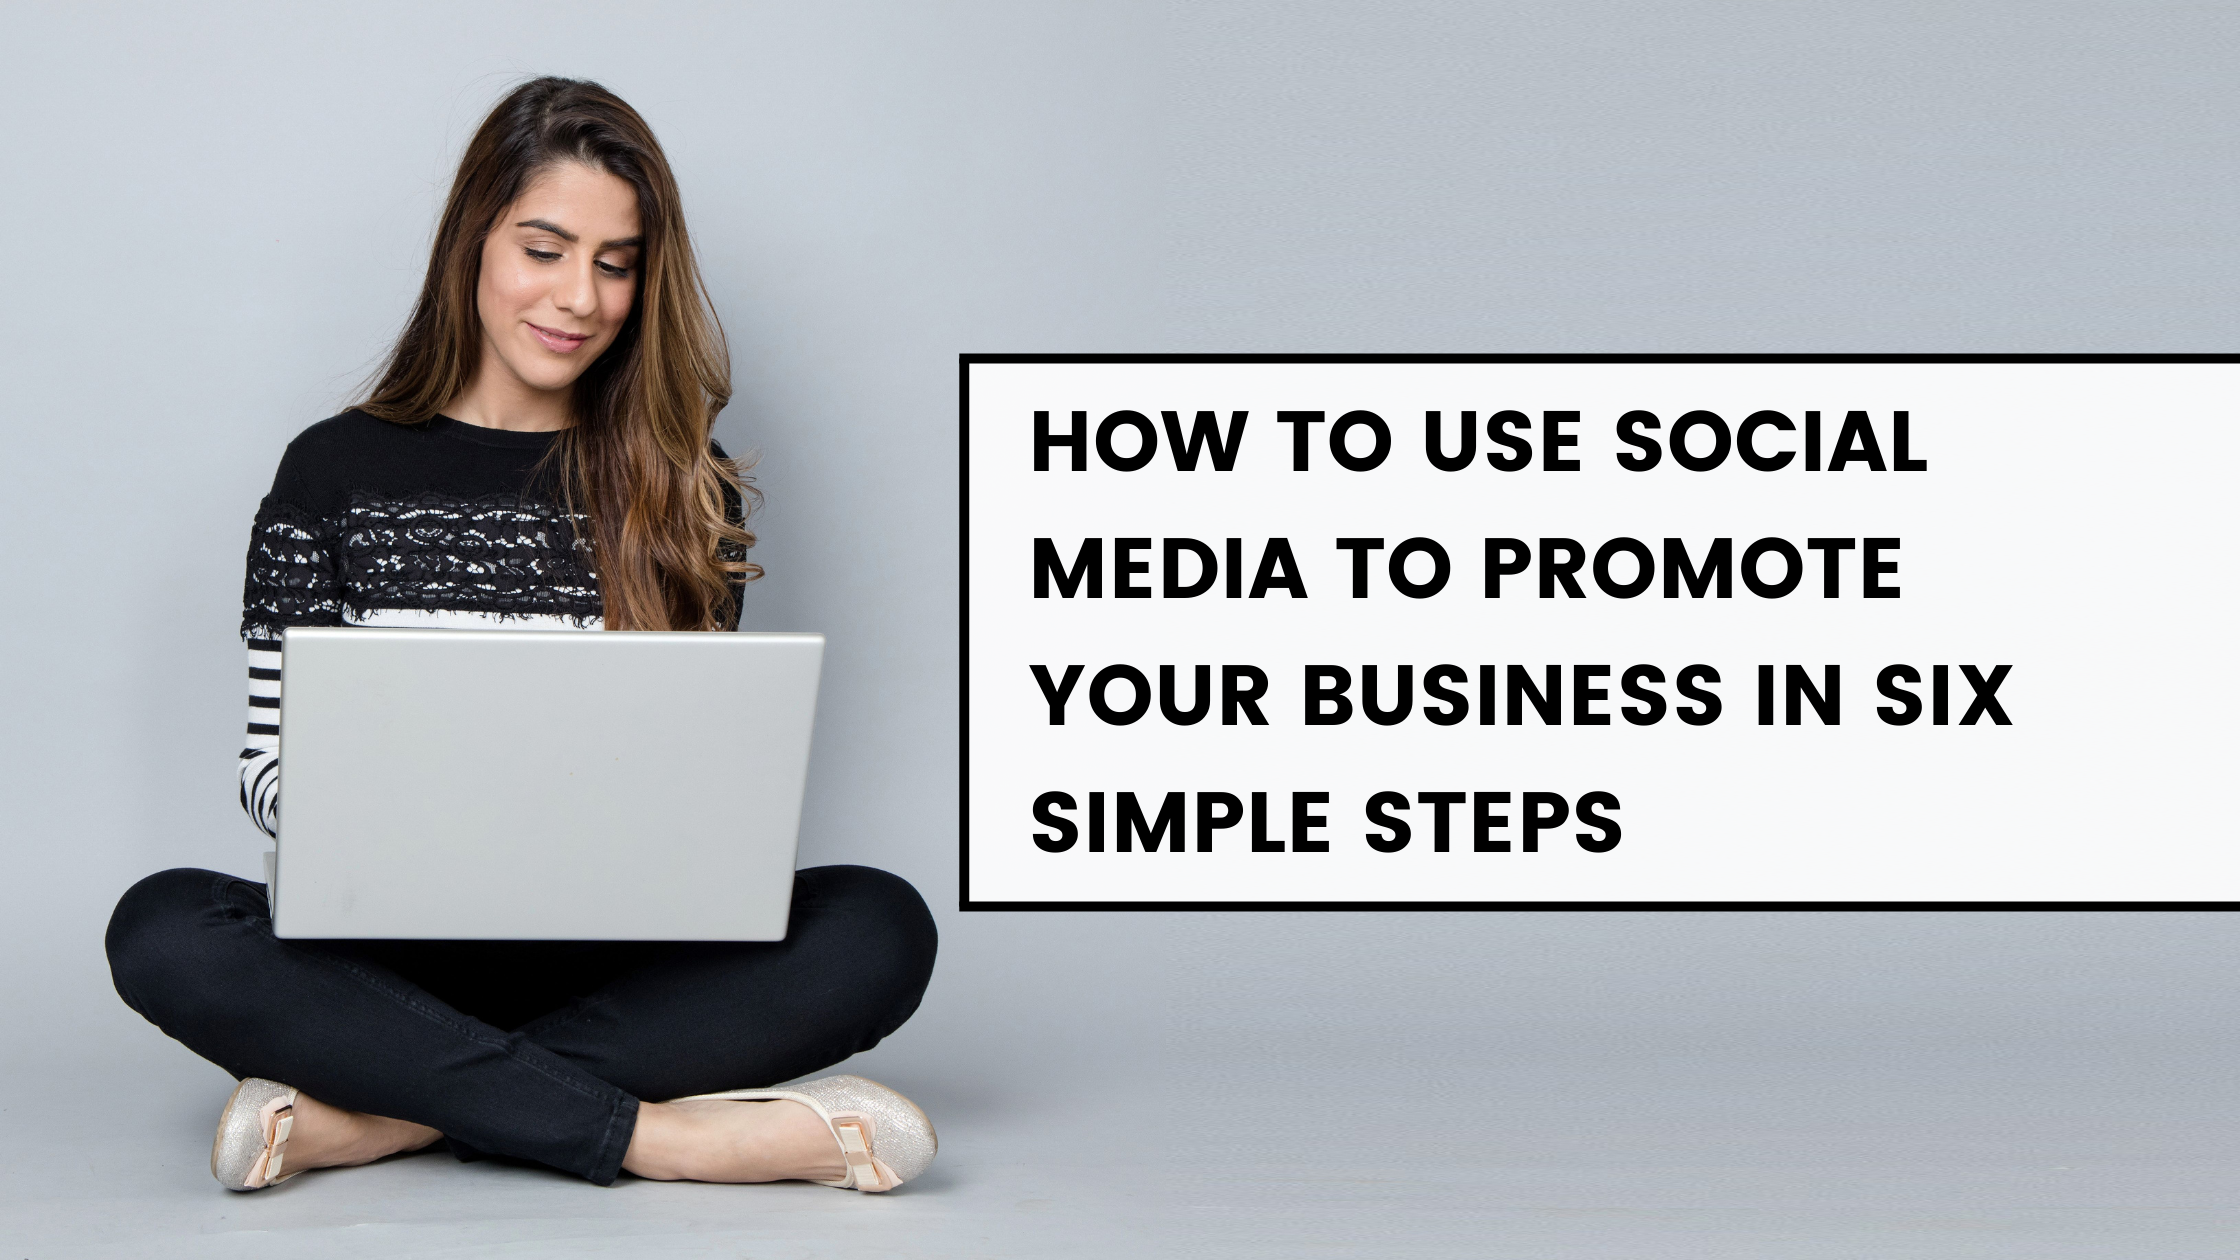 How To Use Social Media To Promote Your Business In Six Simple Steps